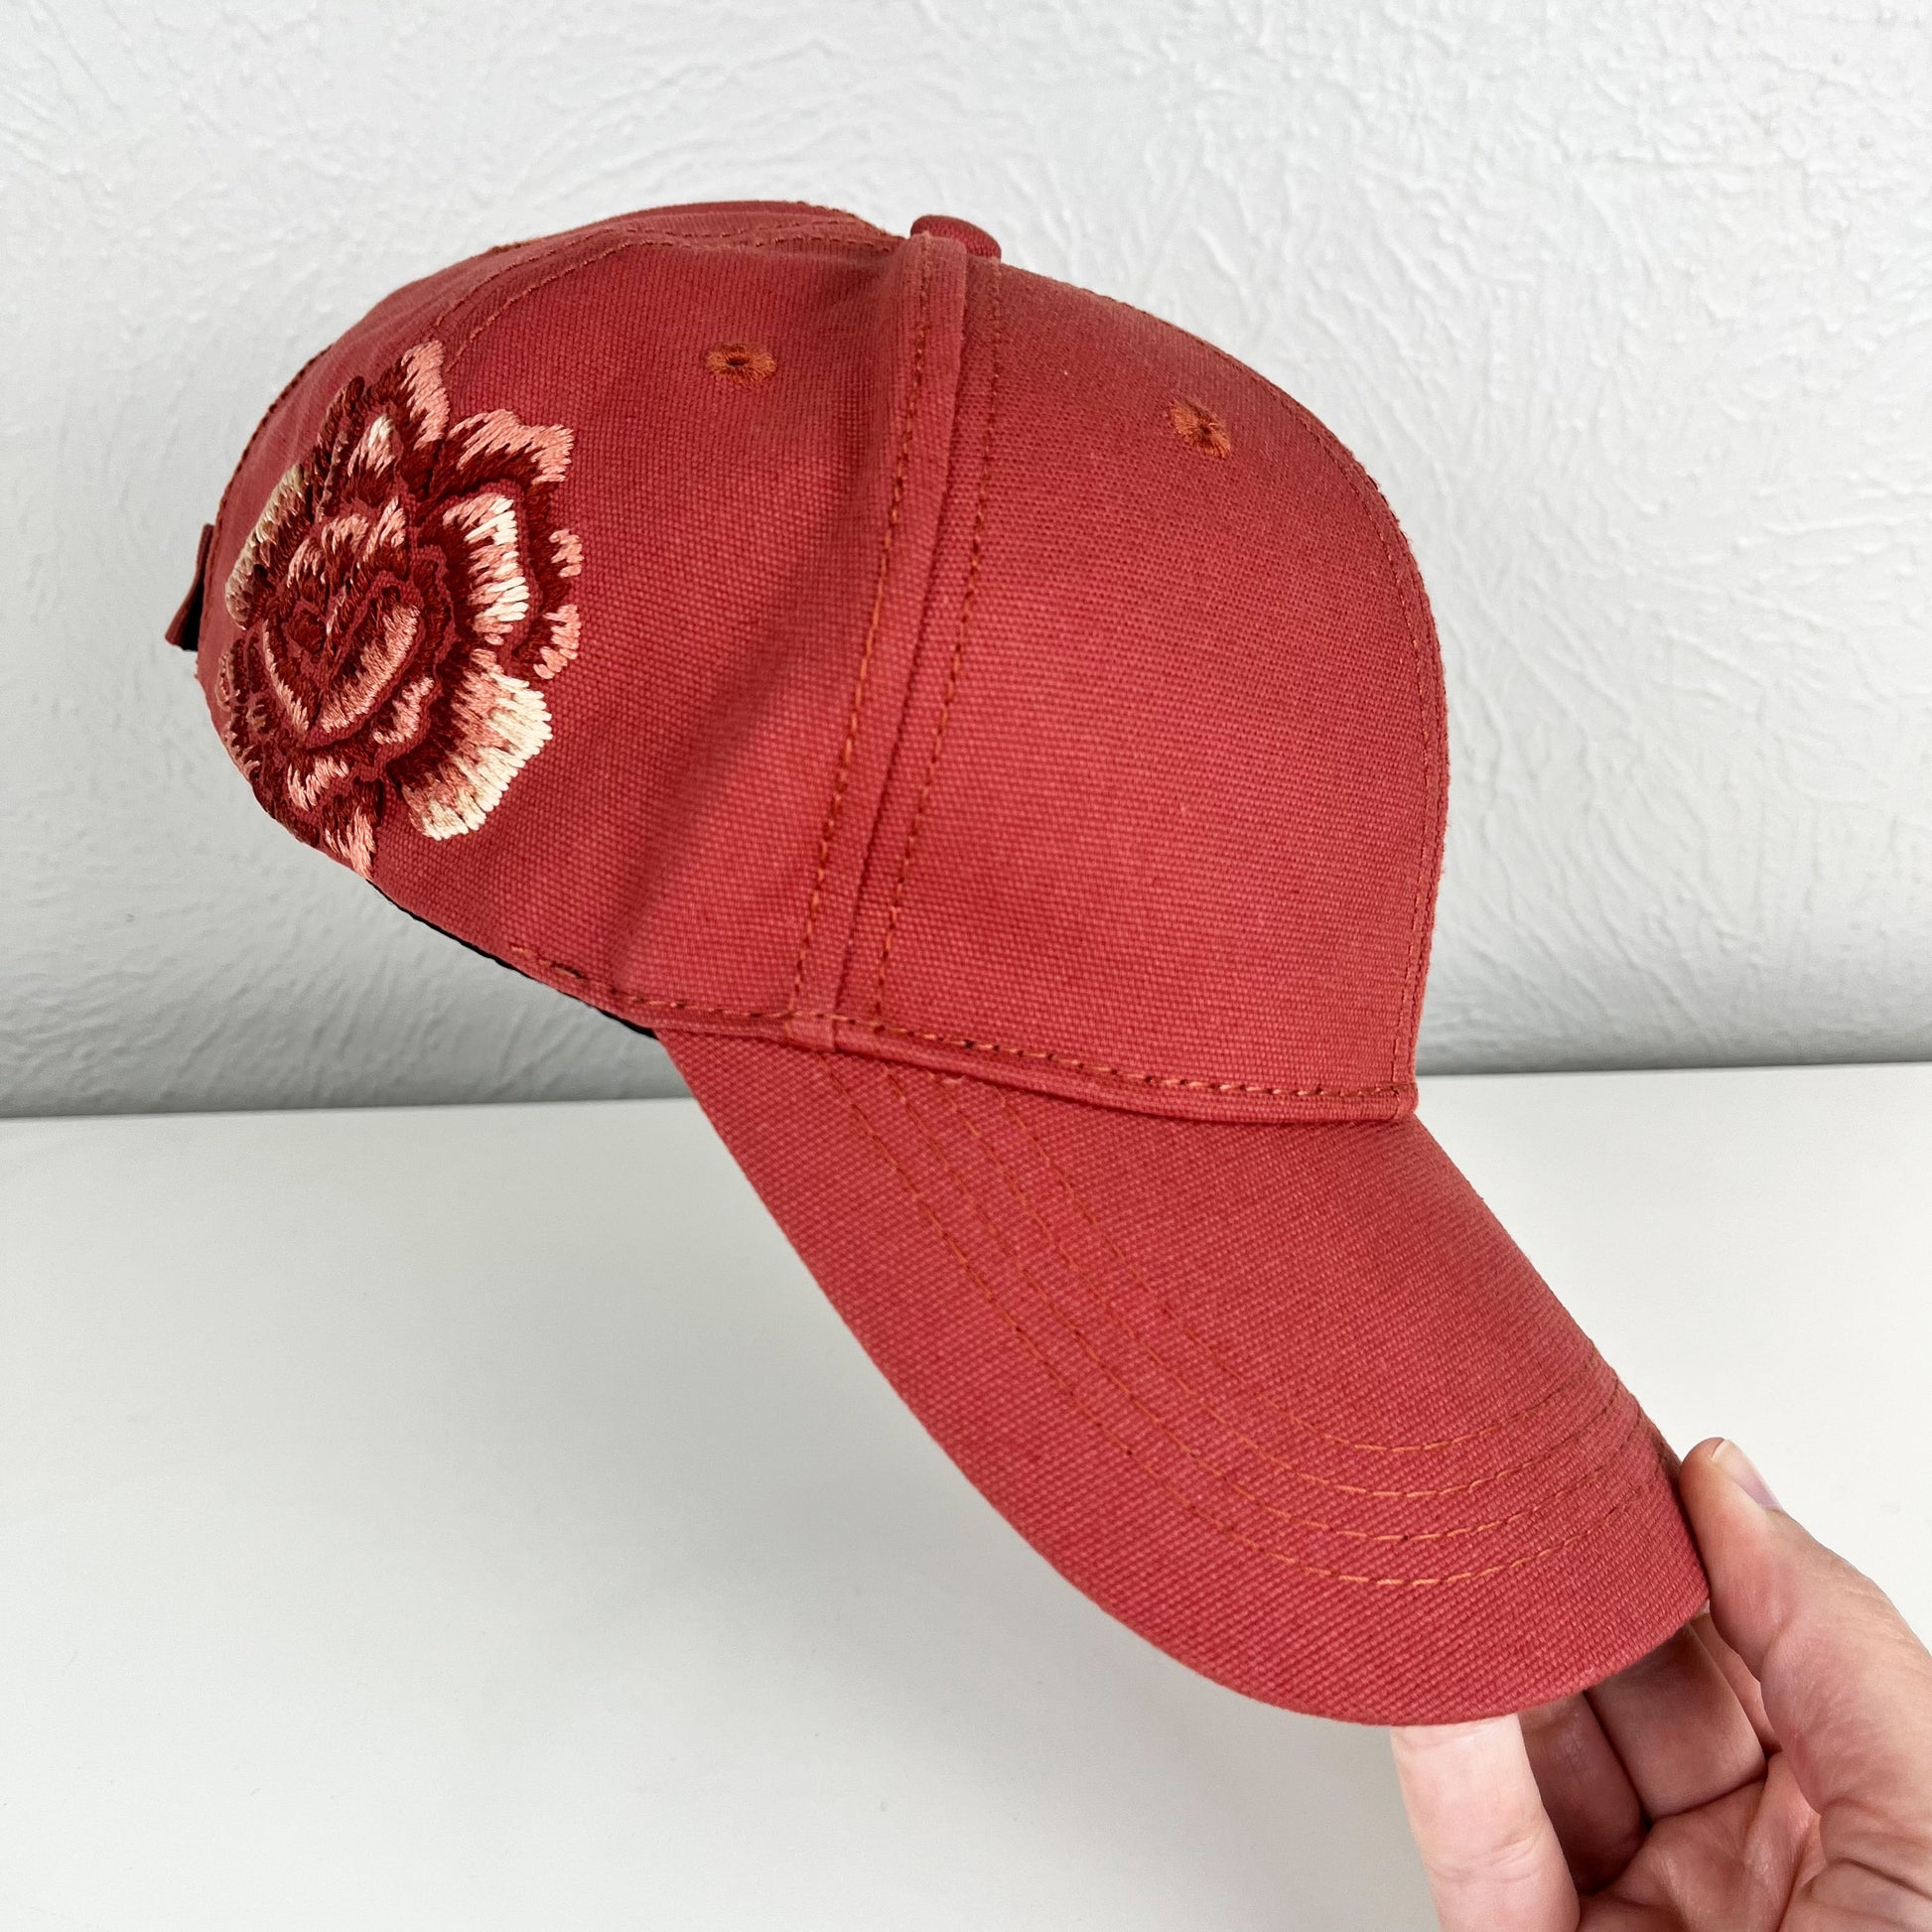 terra cotta colored baseball hat with a large hand embroidered peony on the side, also in shades of terra cotta, held up in the air at an angle